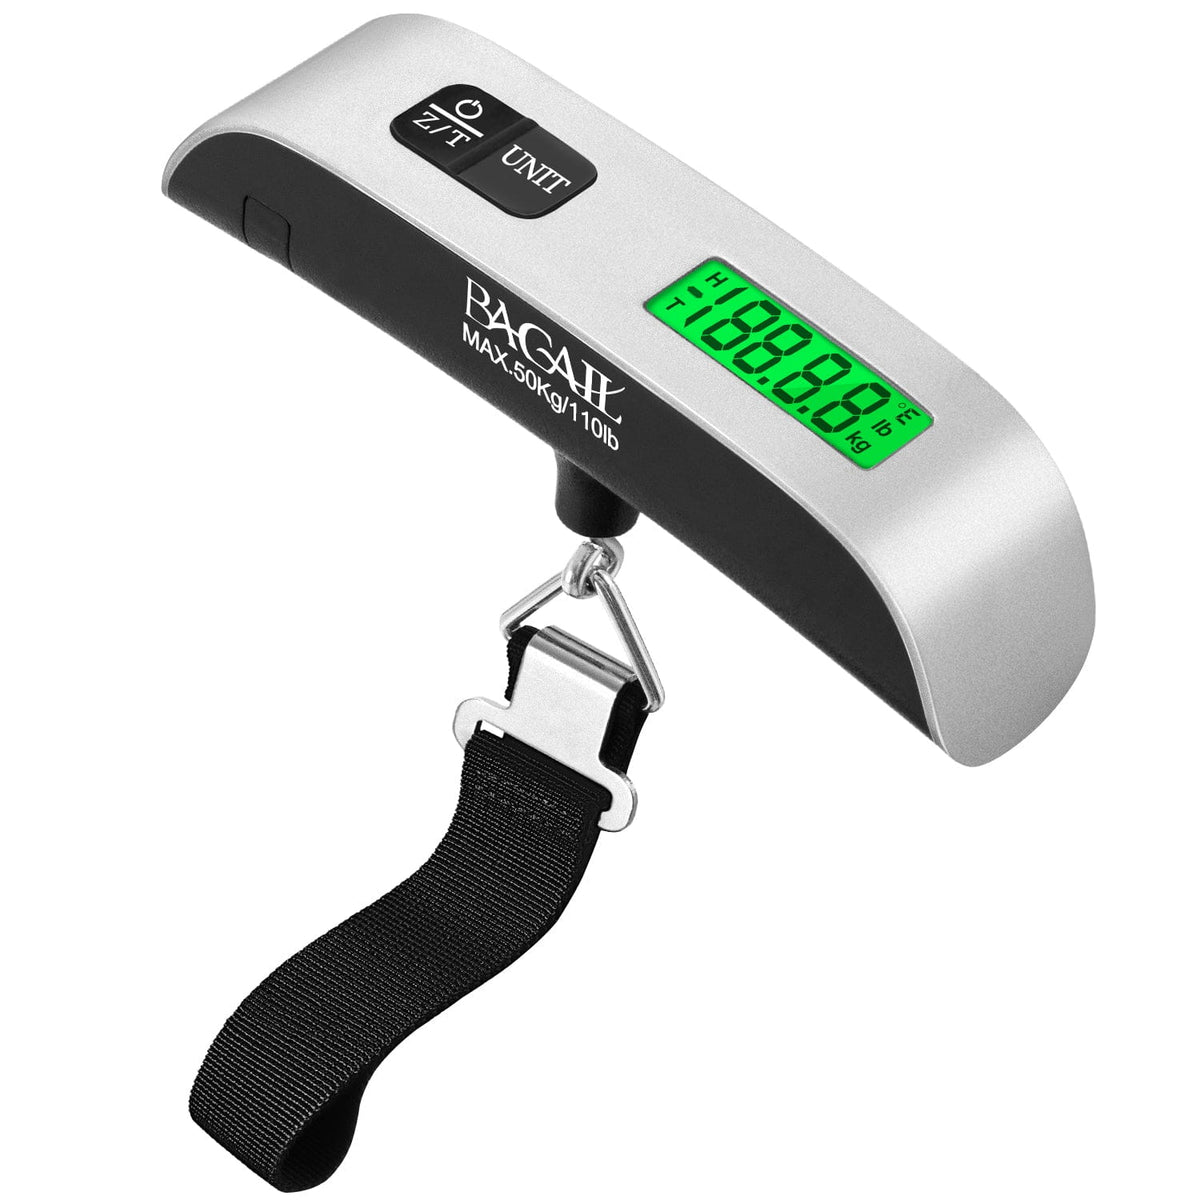 https://www.bagail.com/cdn/shop/files/bagail-digital-luggage-scale-hanging-baggage-scale-with-backlit-lcd-display-travel-weight-scale-portable-suitcase-weighing-scale-with-hook-110-lb-capacity-battery-included-silver-with_a6503bea-1acd-465f-b320-0813eebcb36d_1200x.jpg?v=1686554525